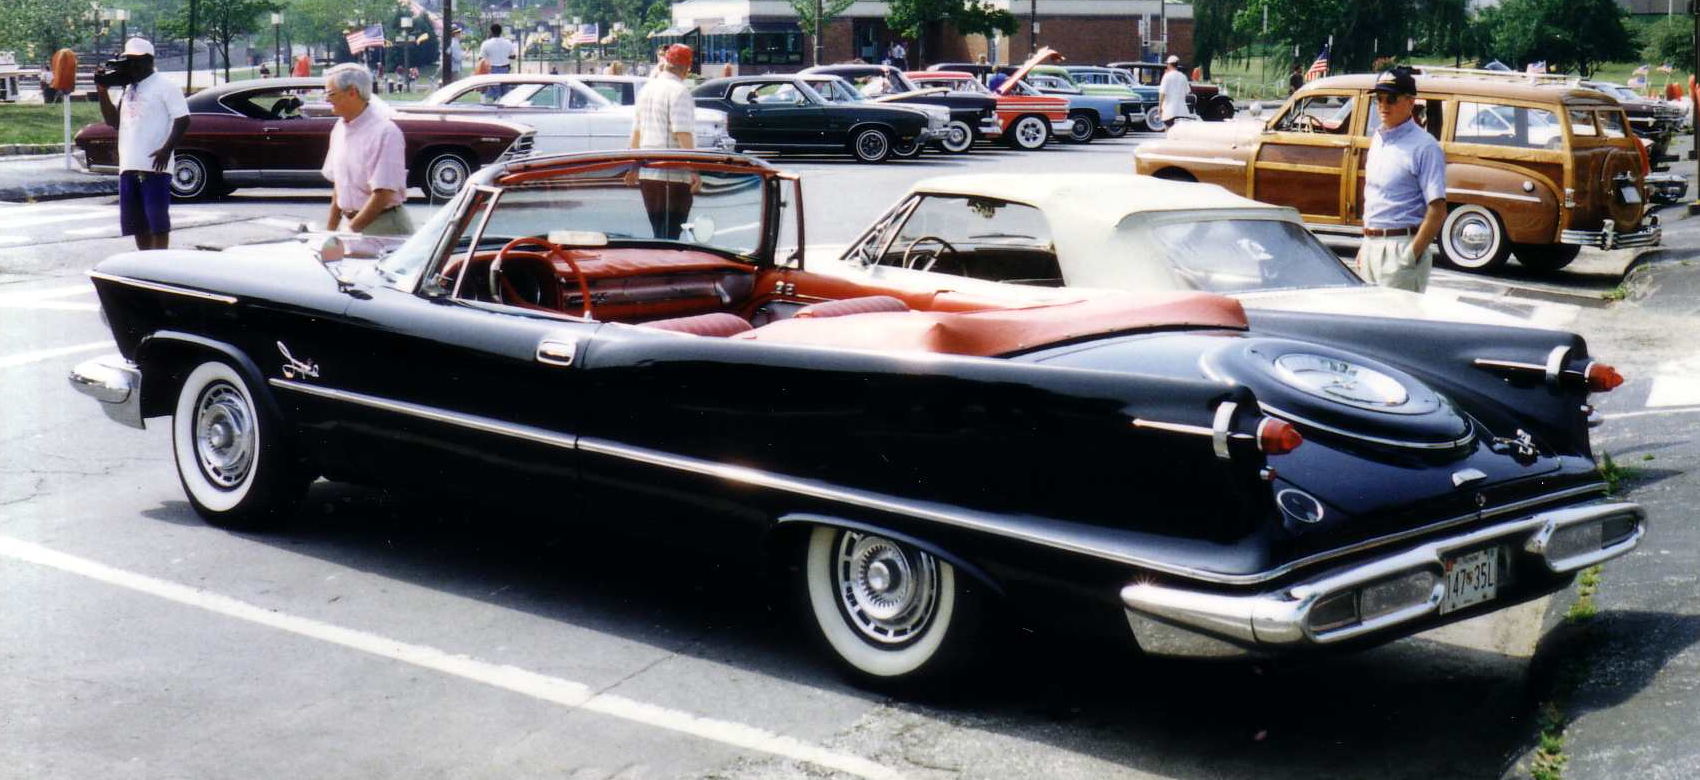 File:Imperial convertible black Baltimore MD.jpg - Wikimedia Commons